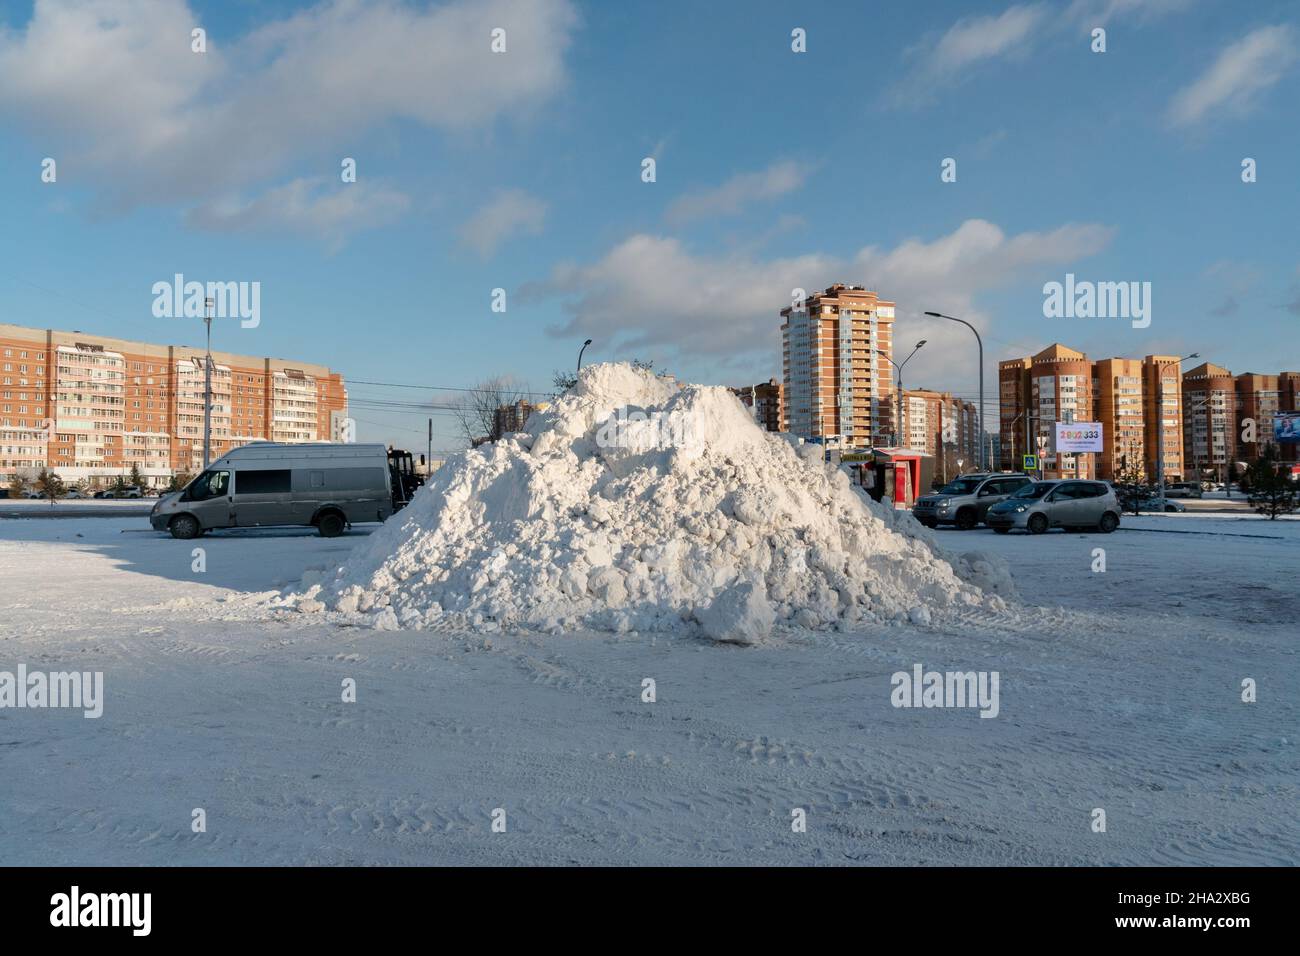 A large pile of snow lies in a parking lot on the street after a snowfall with residential buildings in the background. Stock Photo